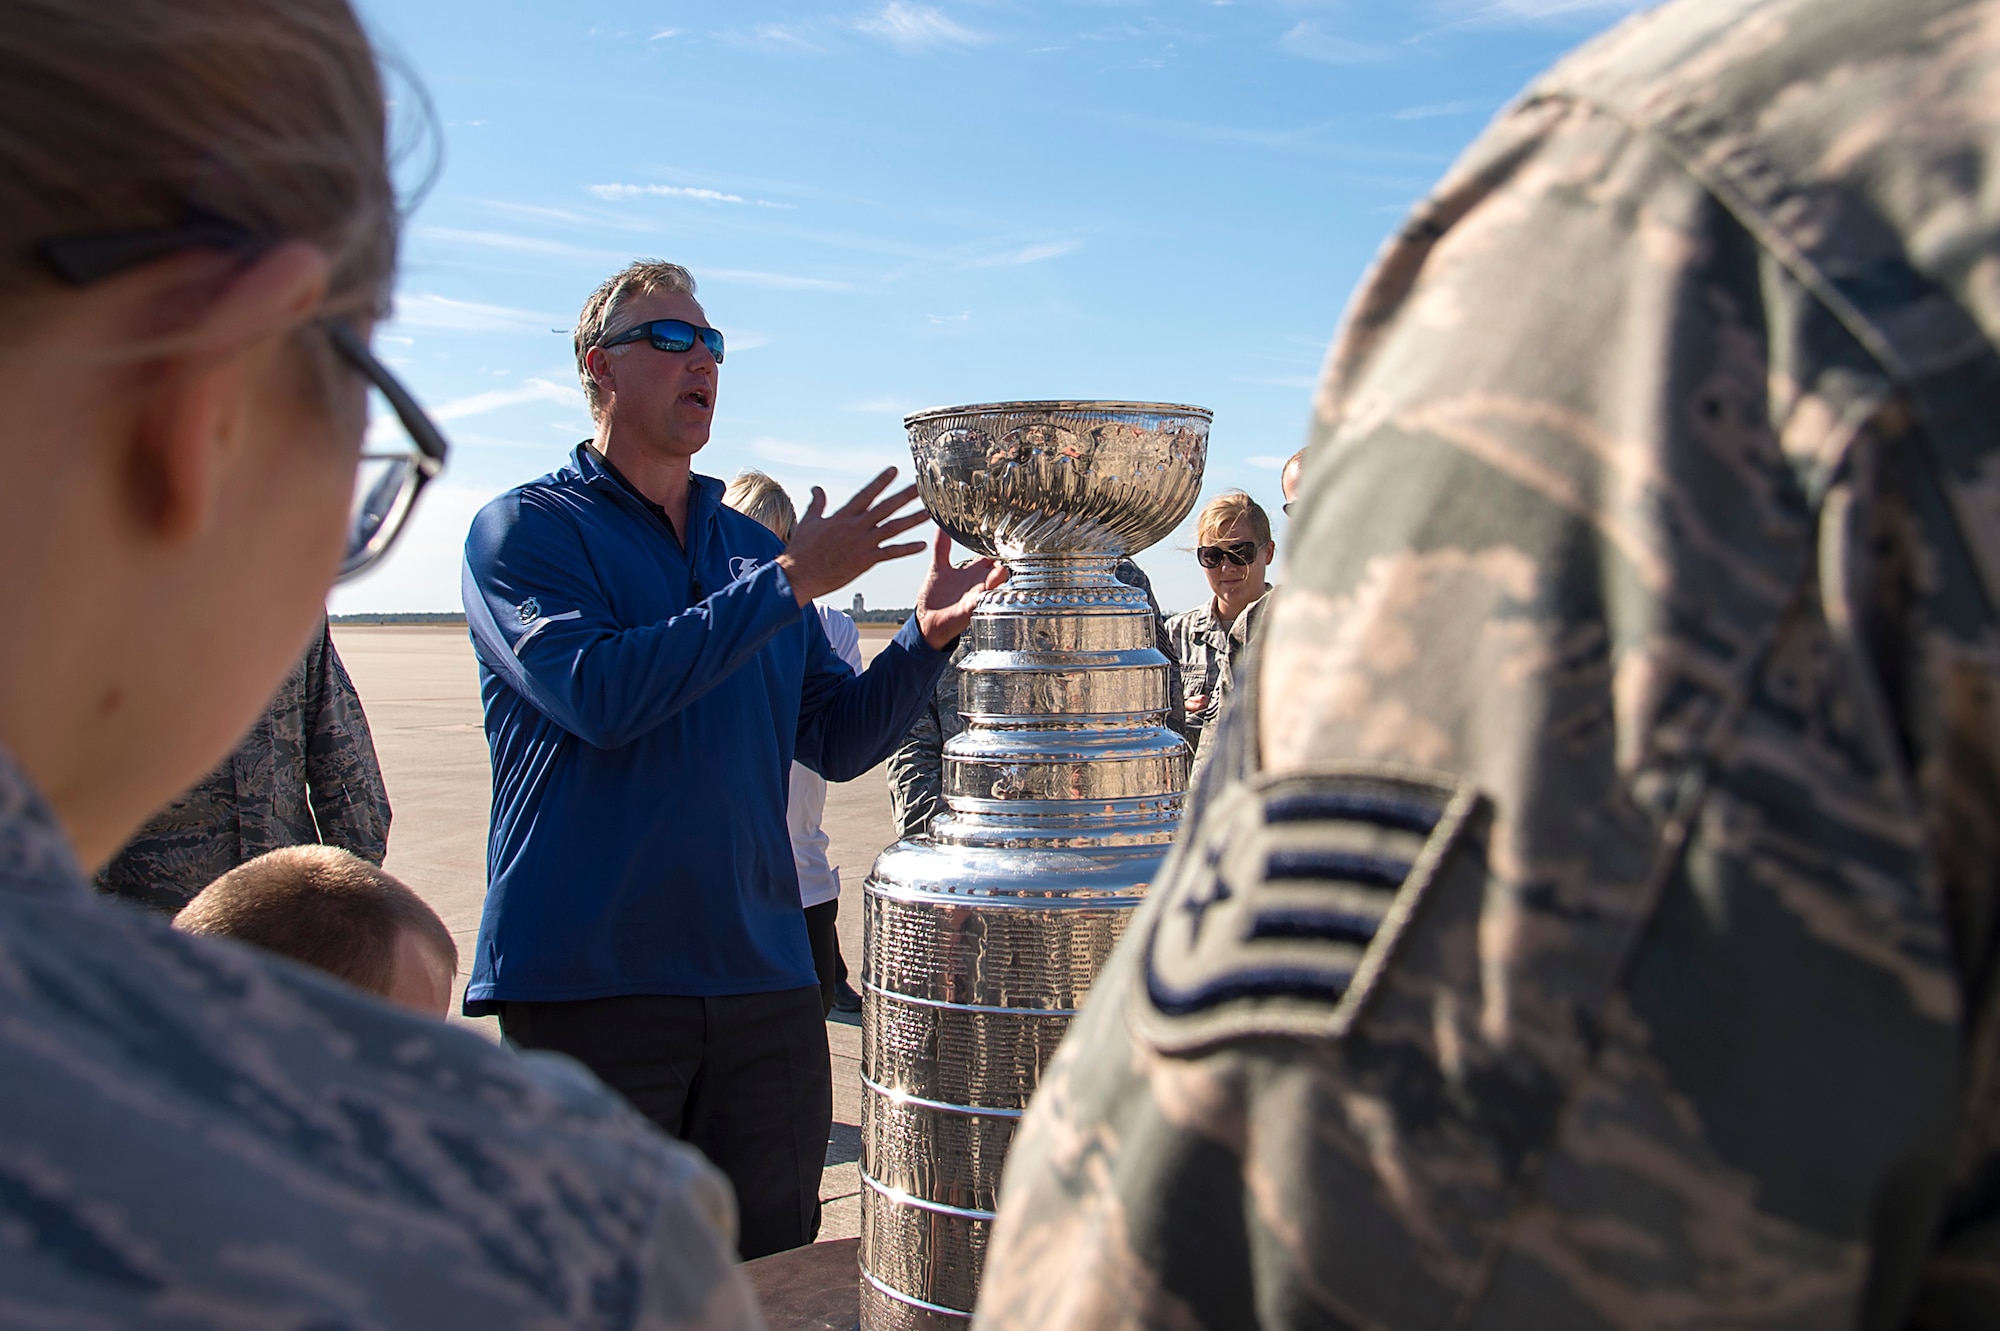 NHL All-Star game brings Stanley Cup to MacDill > MacDill Air Force Base >  News